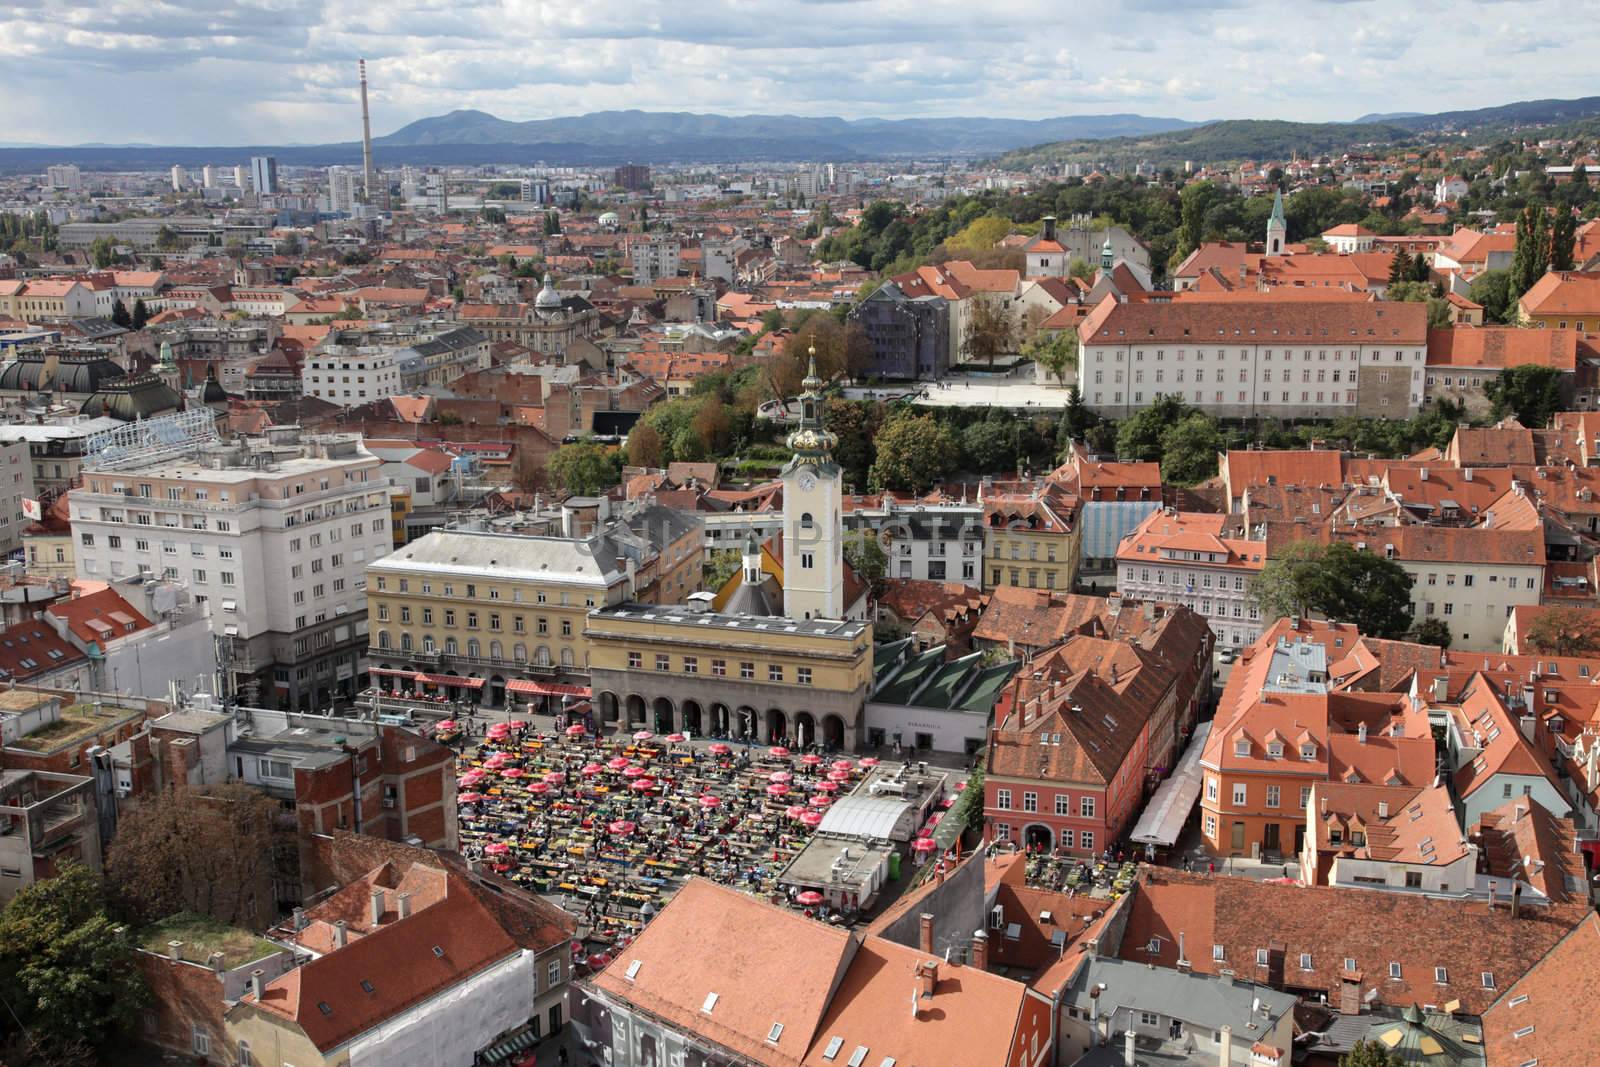 Aerial view of Zagreb, the capital of Croatia